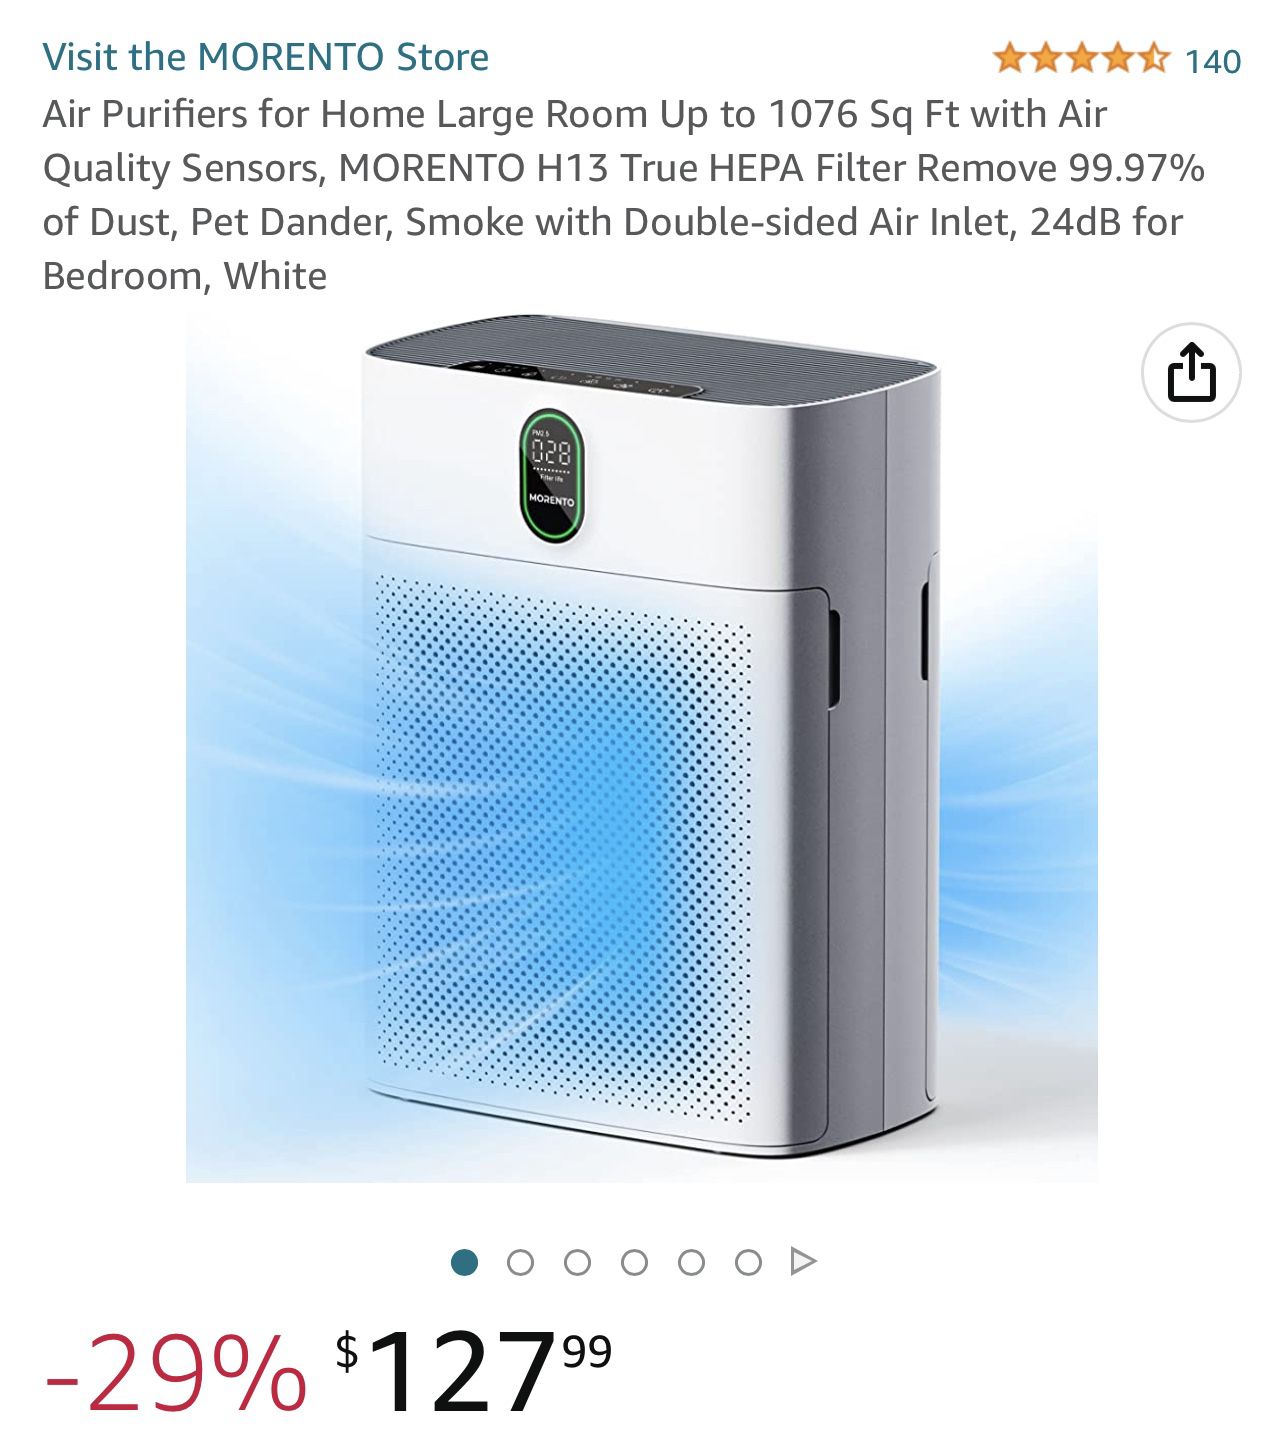  MORENTO Air Purifiers for Home Large Room up to 1076 Sq Ft with  PM 2.5 Display Air Quality Sensor, H13 True HEPA Filter Remove 99.97% of  Pet Hair with Double-sided Air